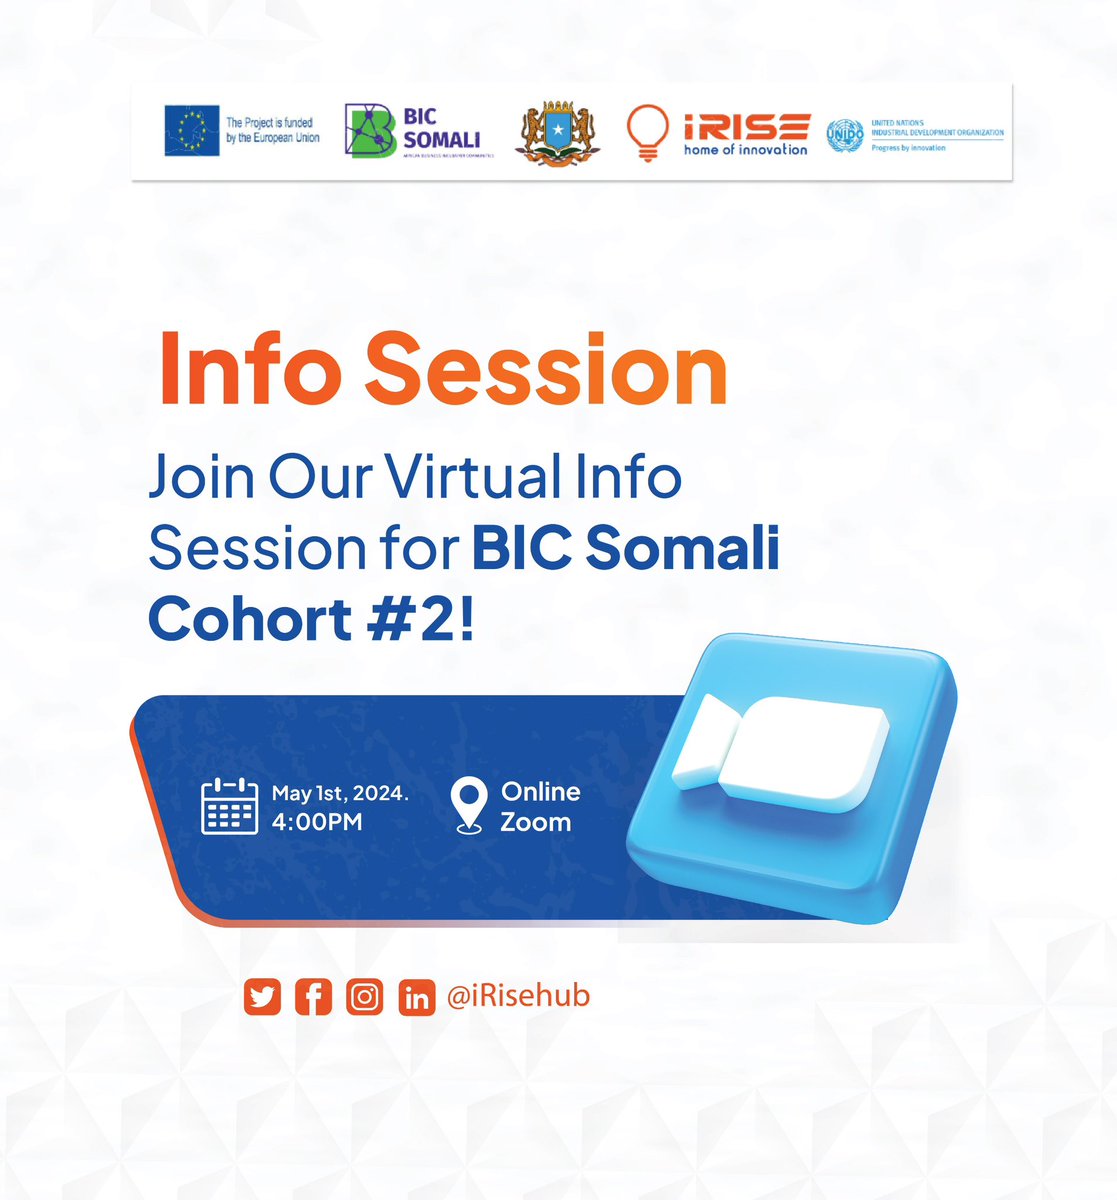 Ready to take your business idea to the next level? 🚀 Join us for an online info session on May 1st for BIC Somali Cohort #2! Learn how to apply, get support, and hear success stories from our first cohort. 🌟 Ask questions and find out how you can succeed with us. Register